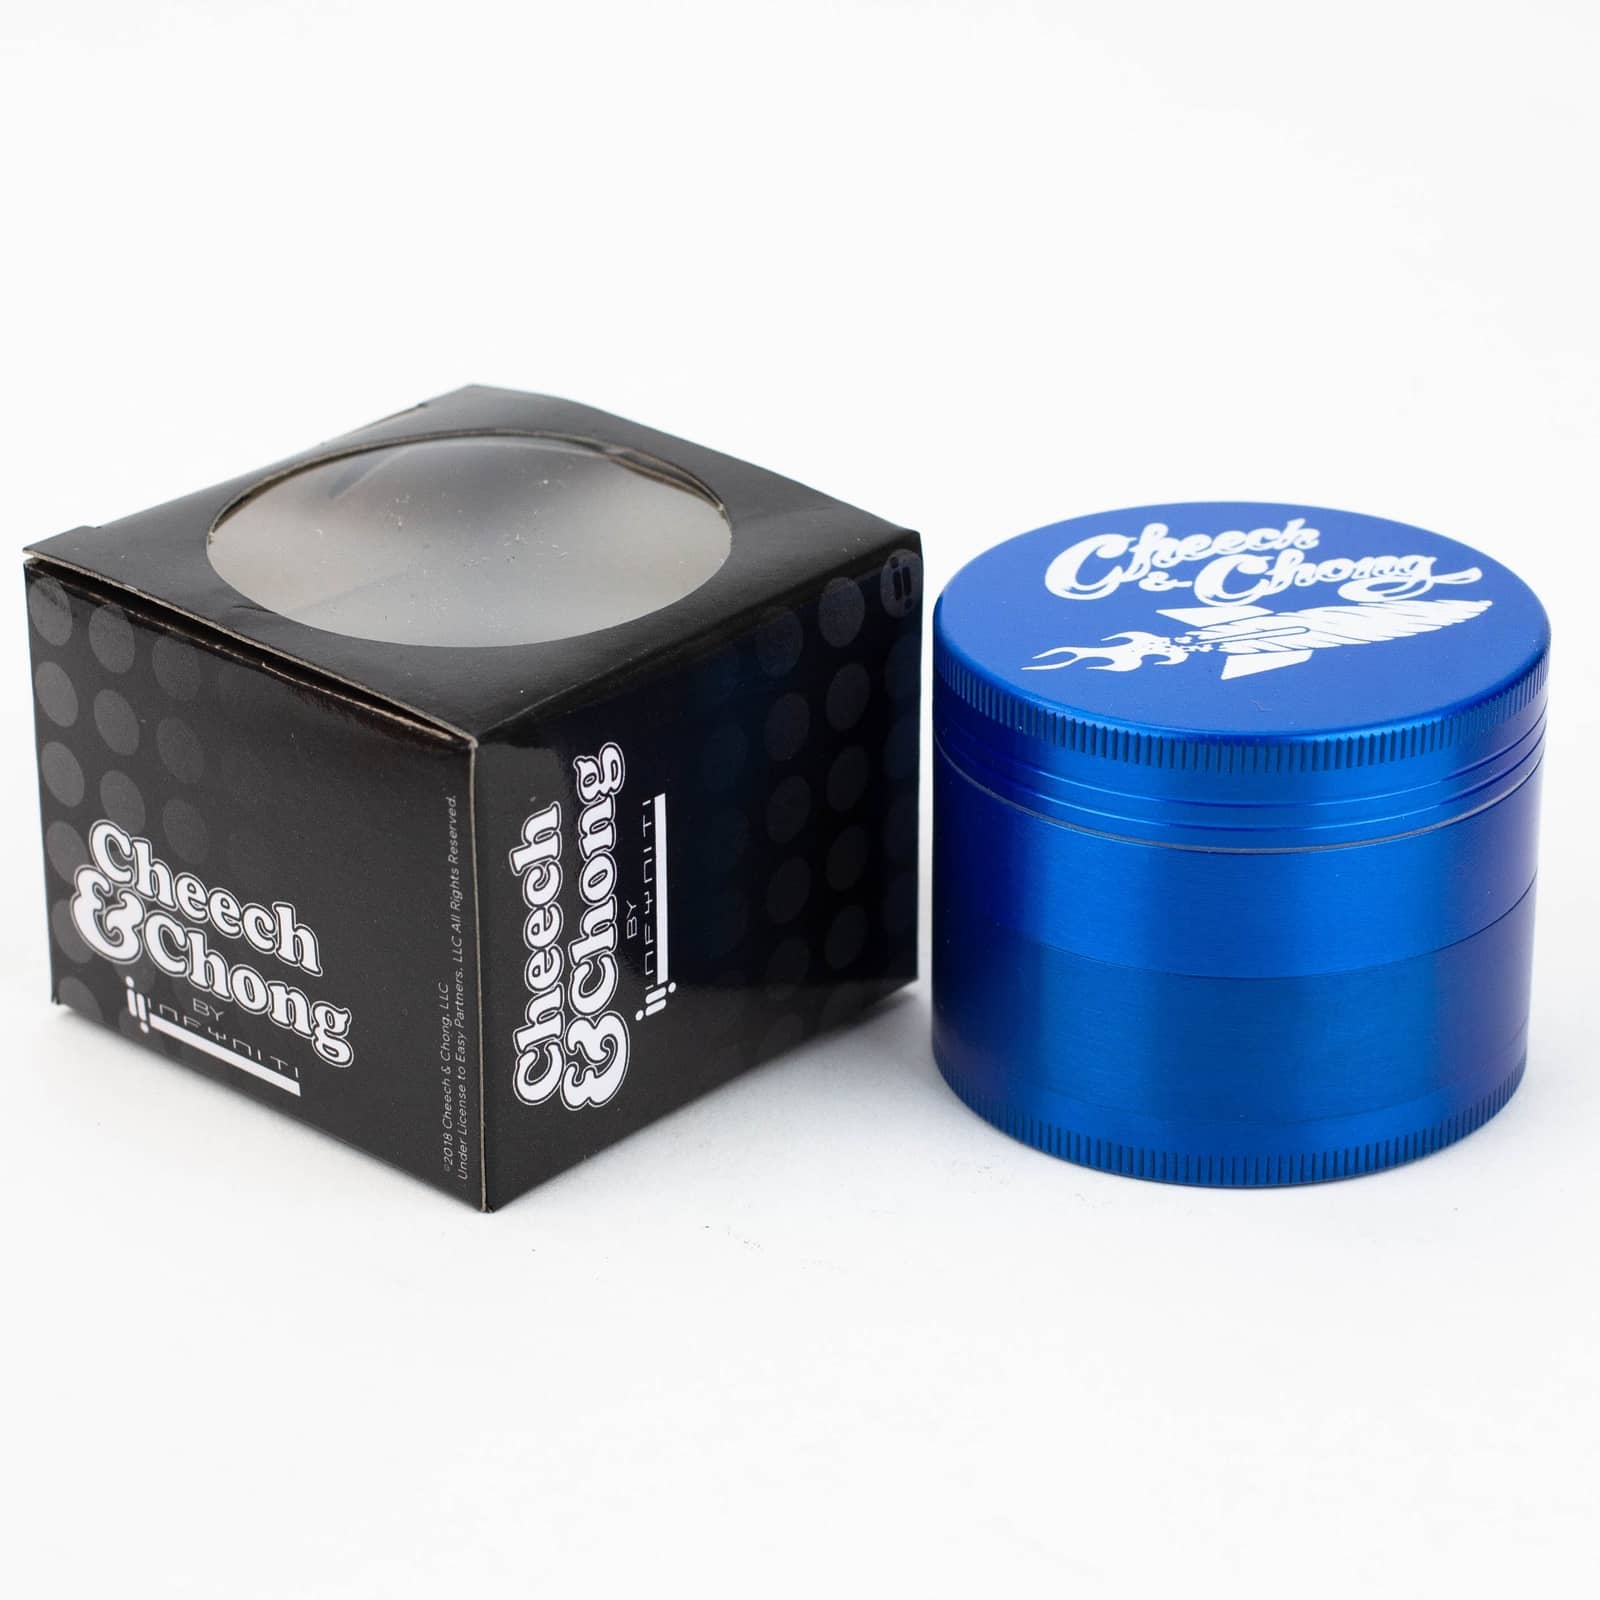 Cheech and Chong 4 Parts Metal Grinder blue up in somke package